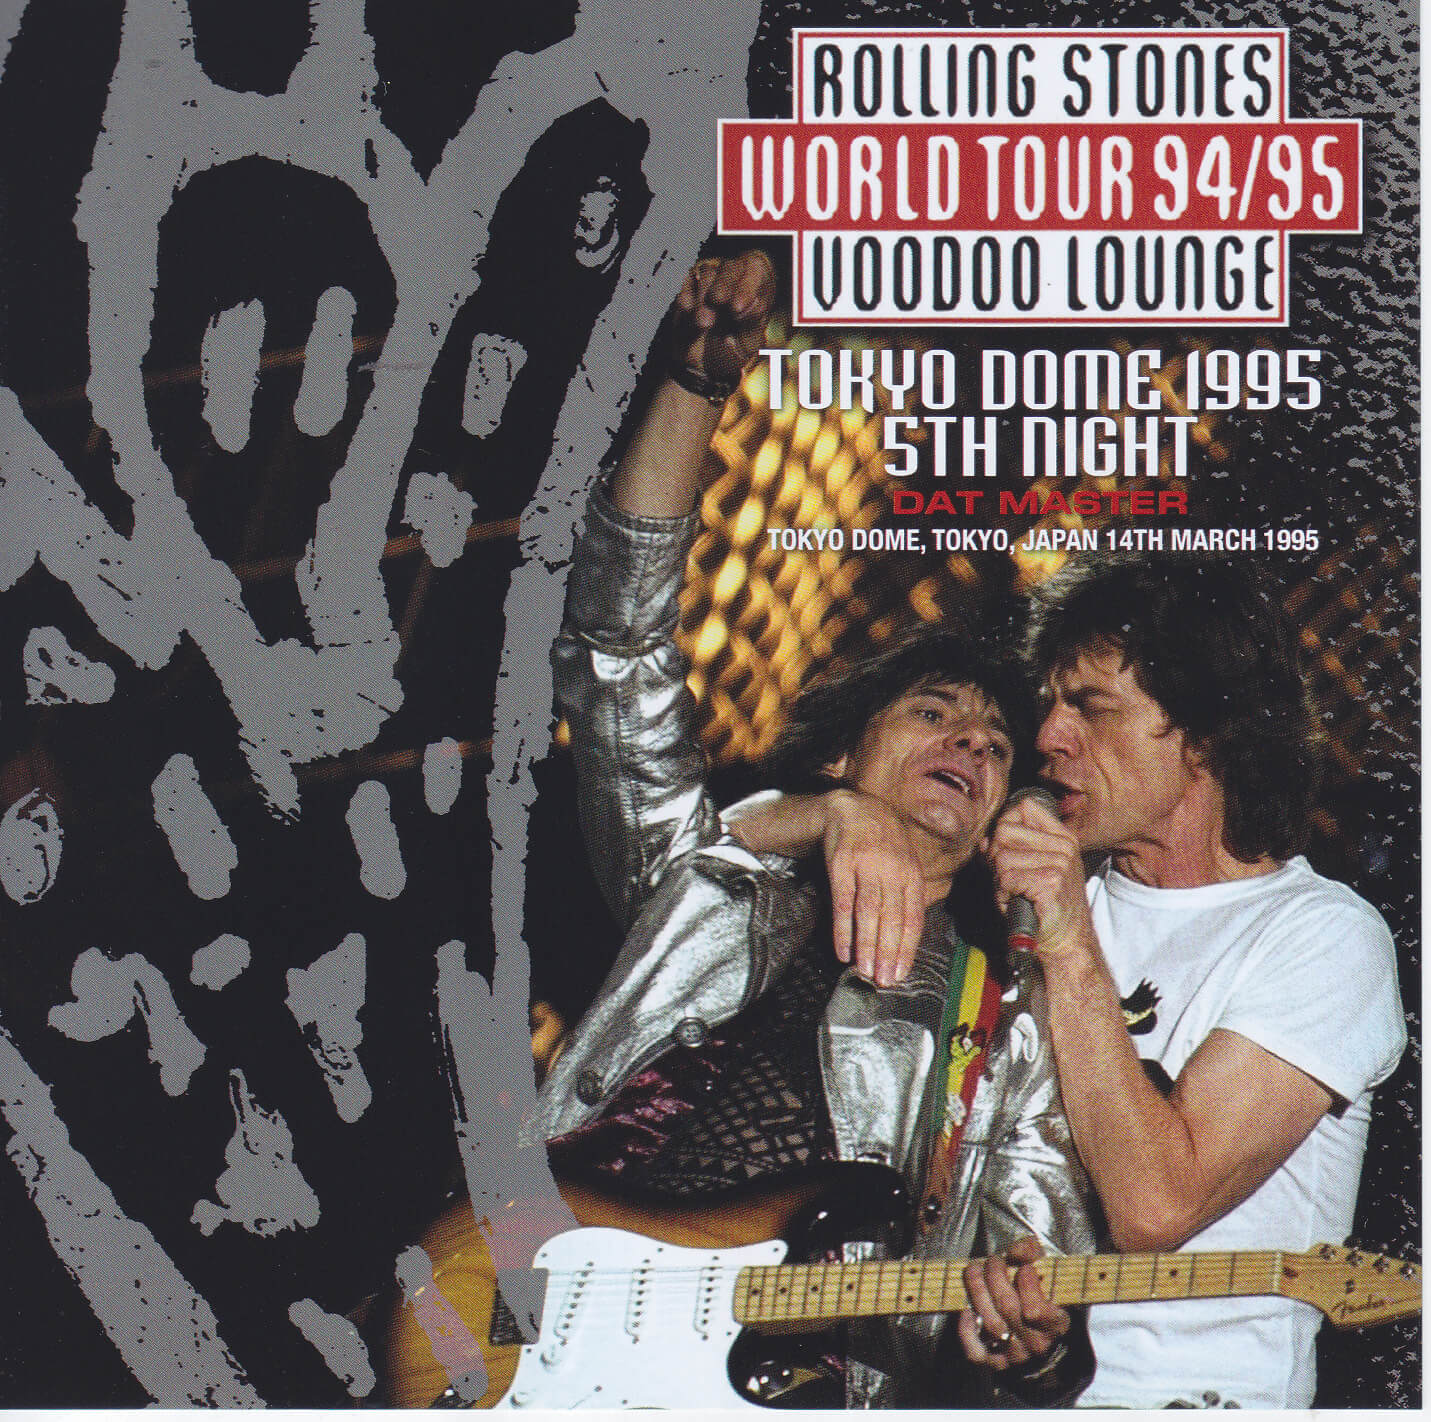 ROLLING STONES - Tokyo Dome 1995 5th Night - LIMITED AND NUMBERED JAPANESE EDITION